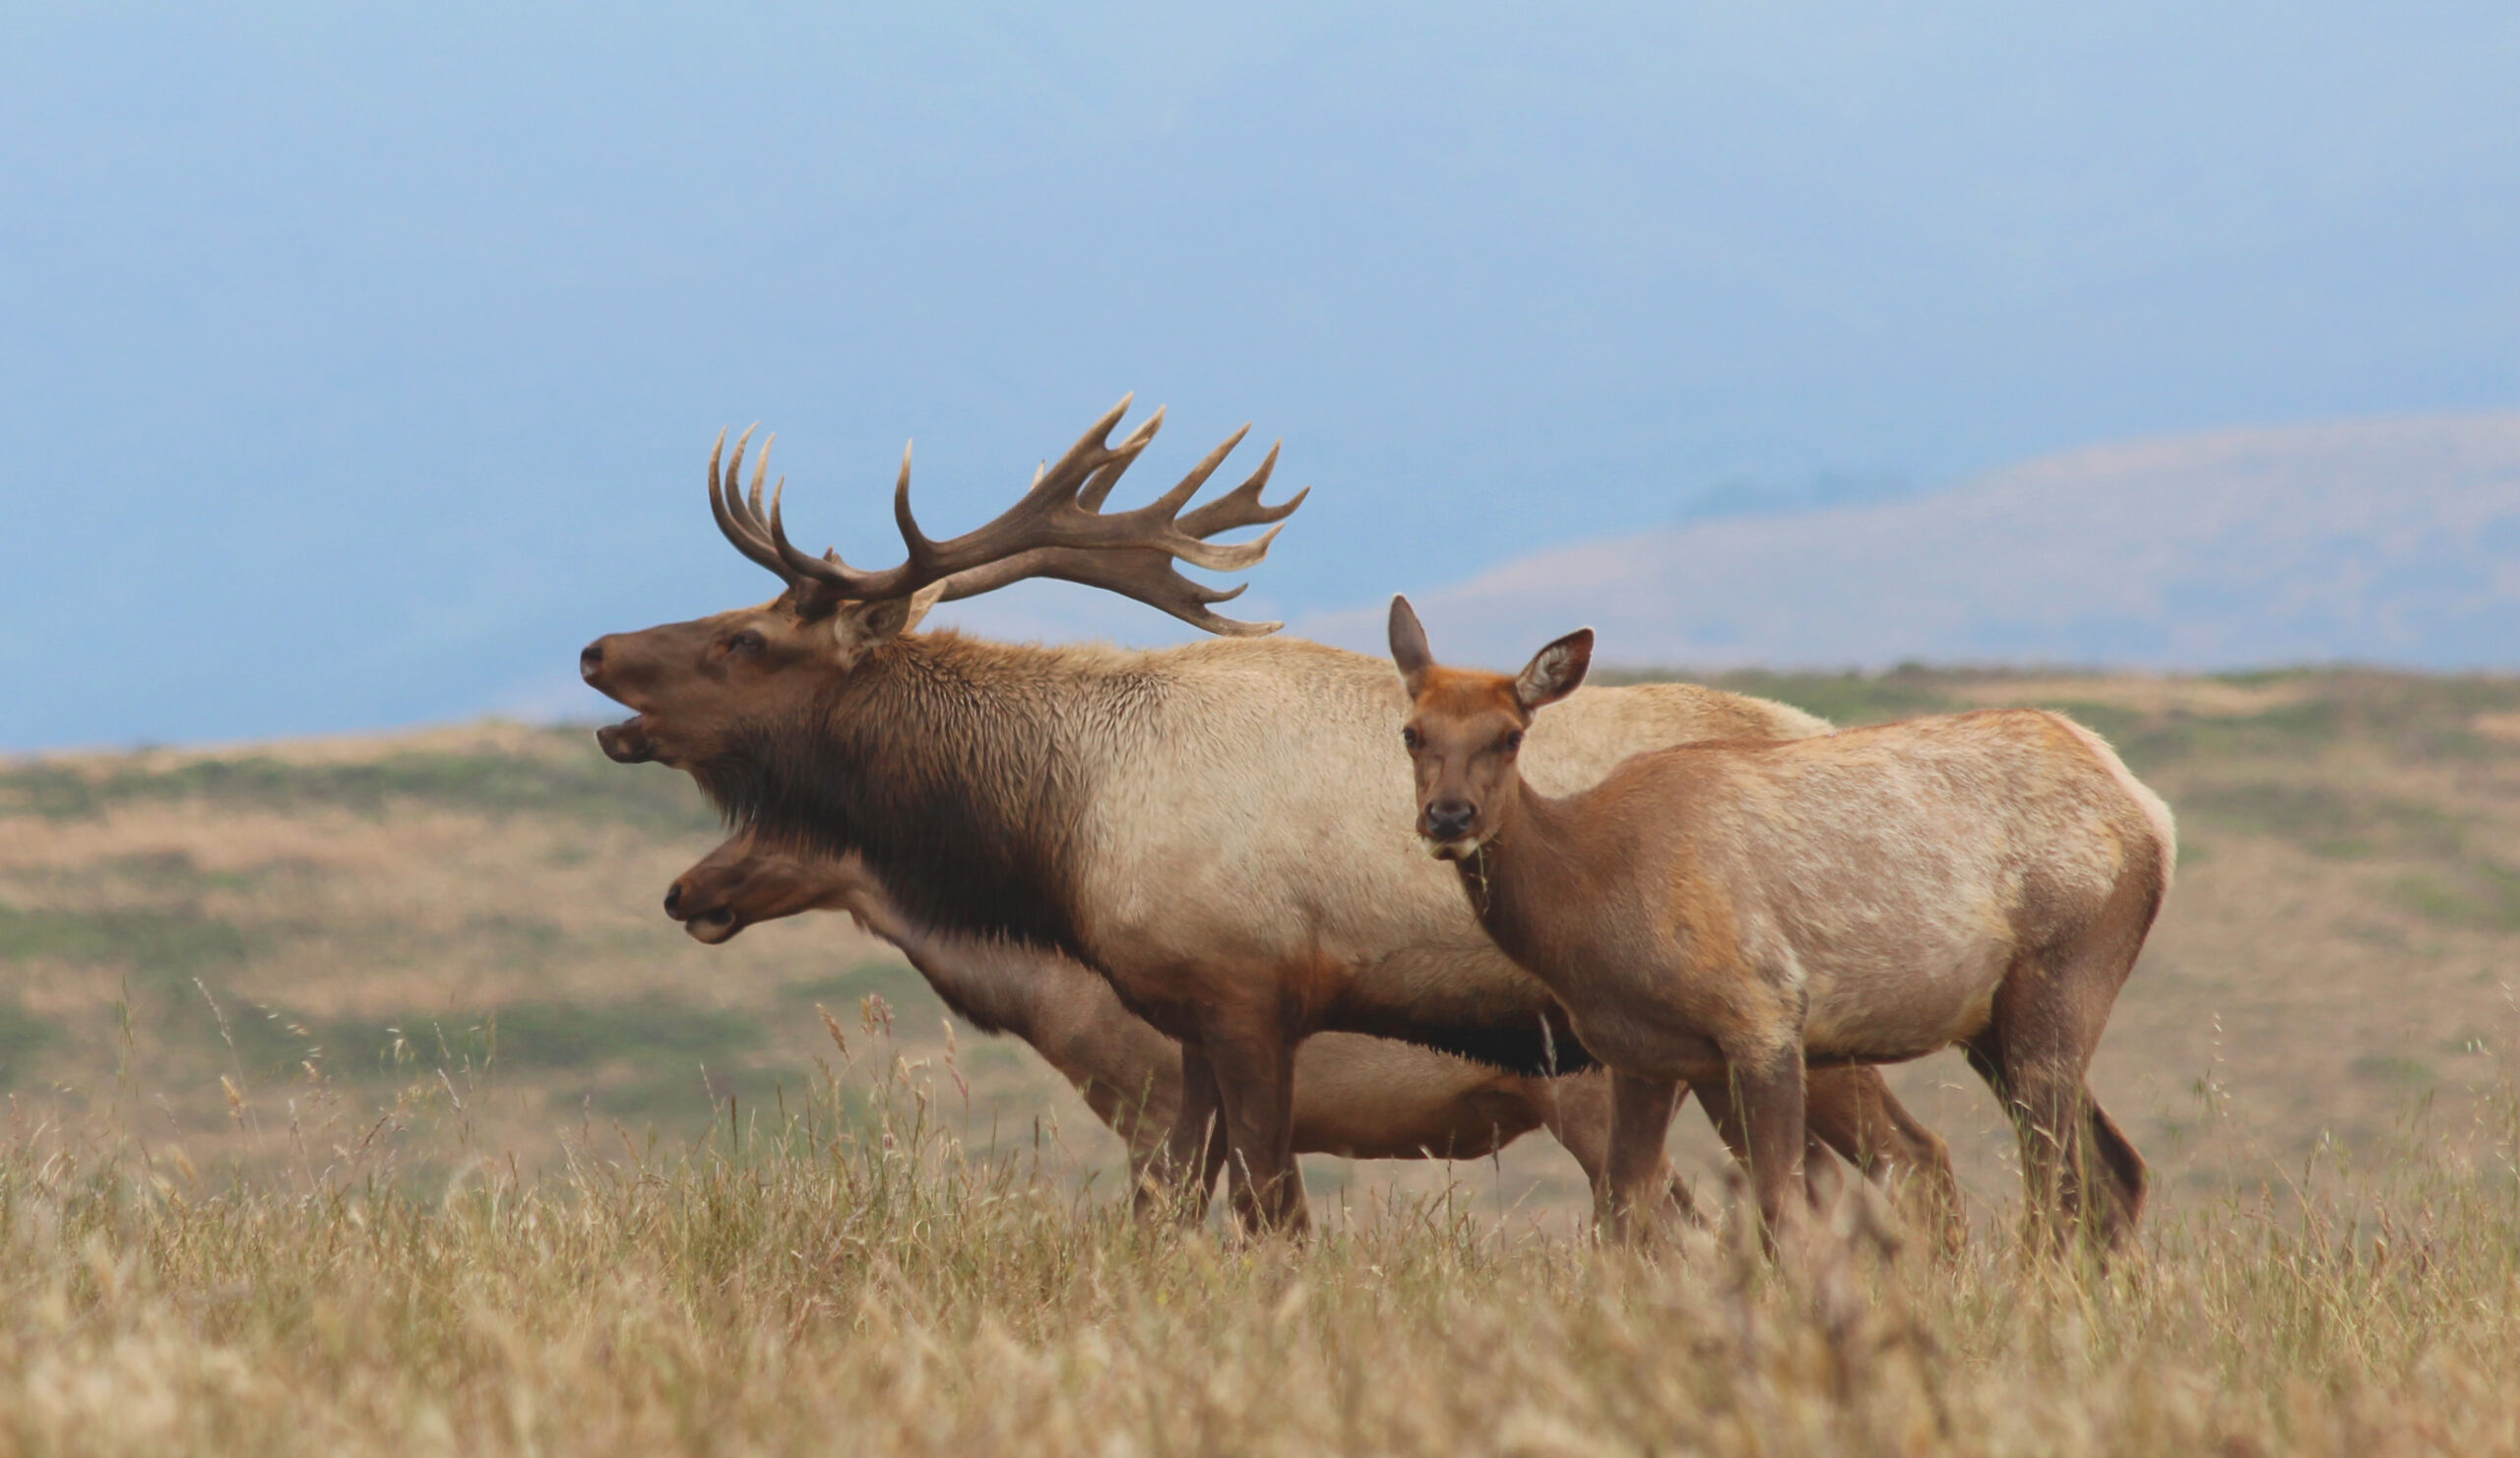 Tule elk can only be found in California.